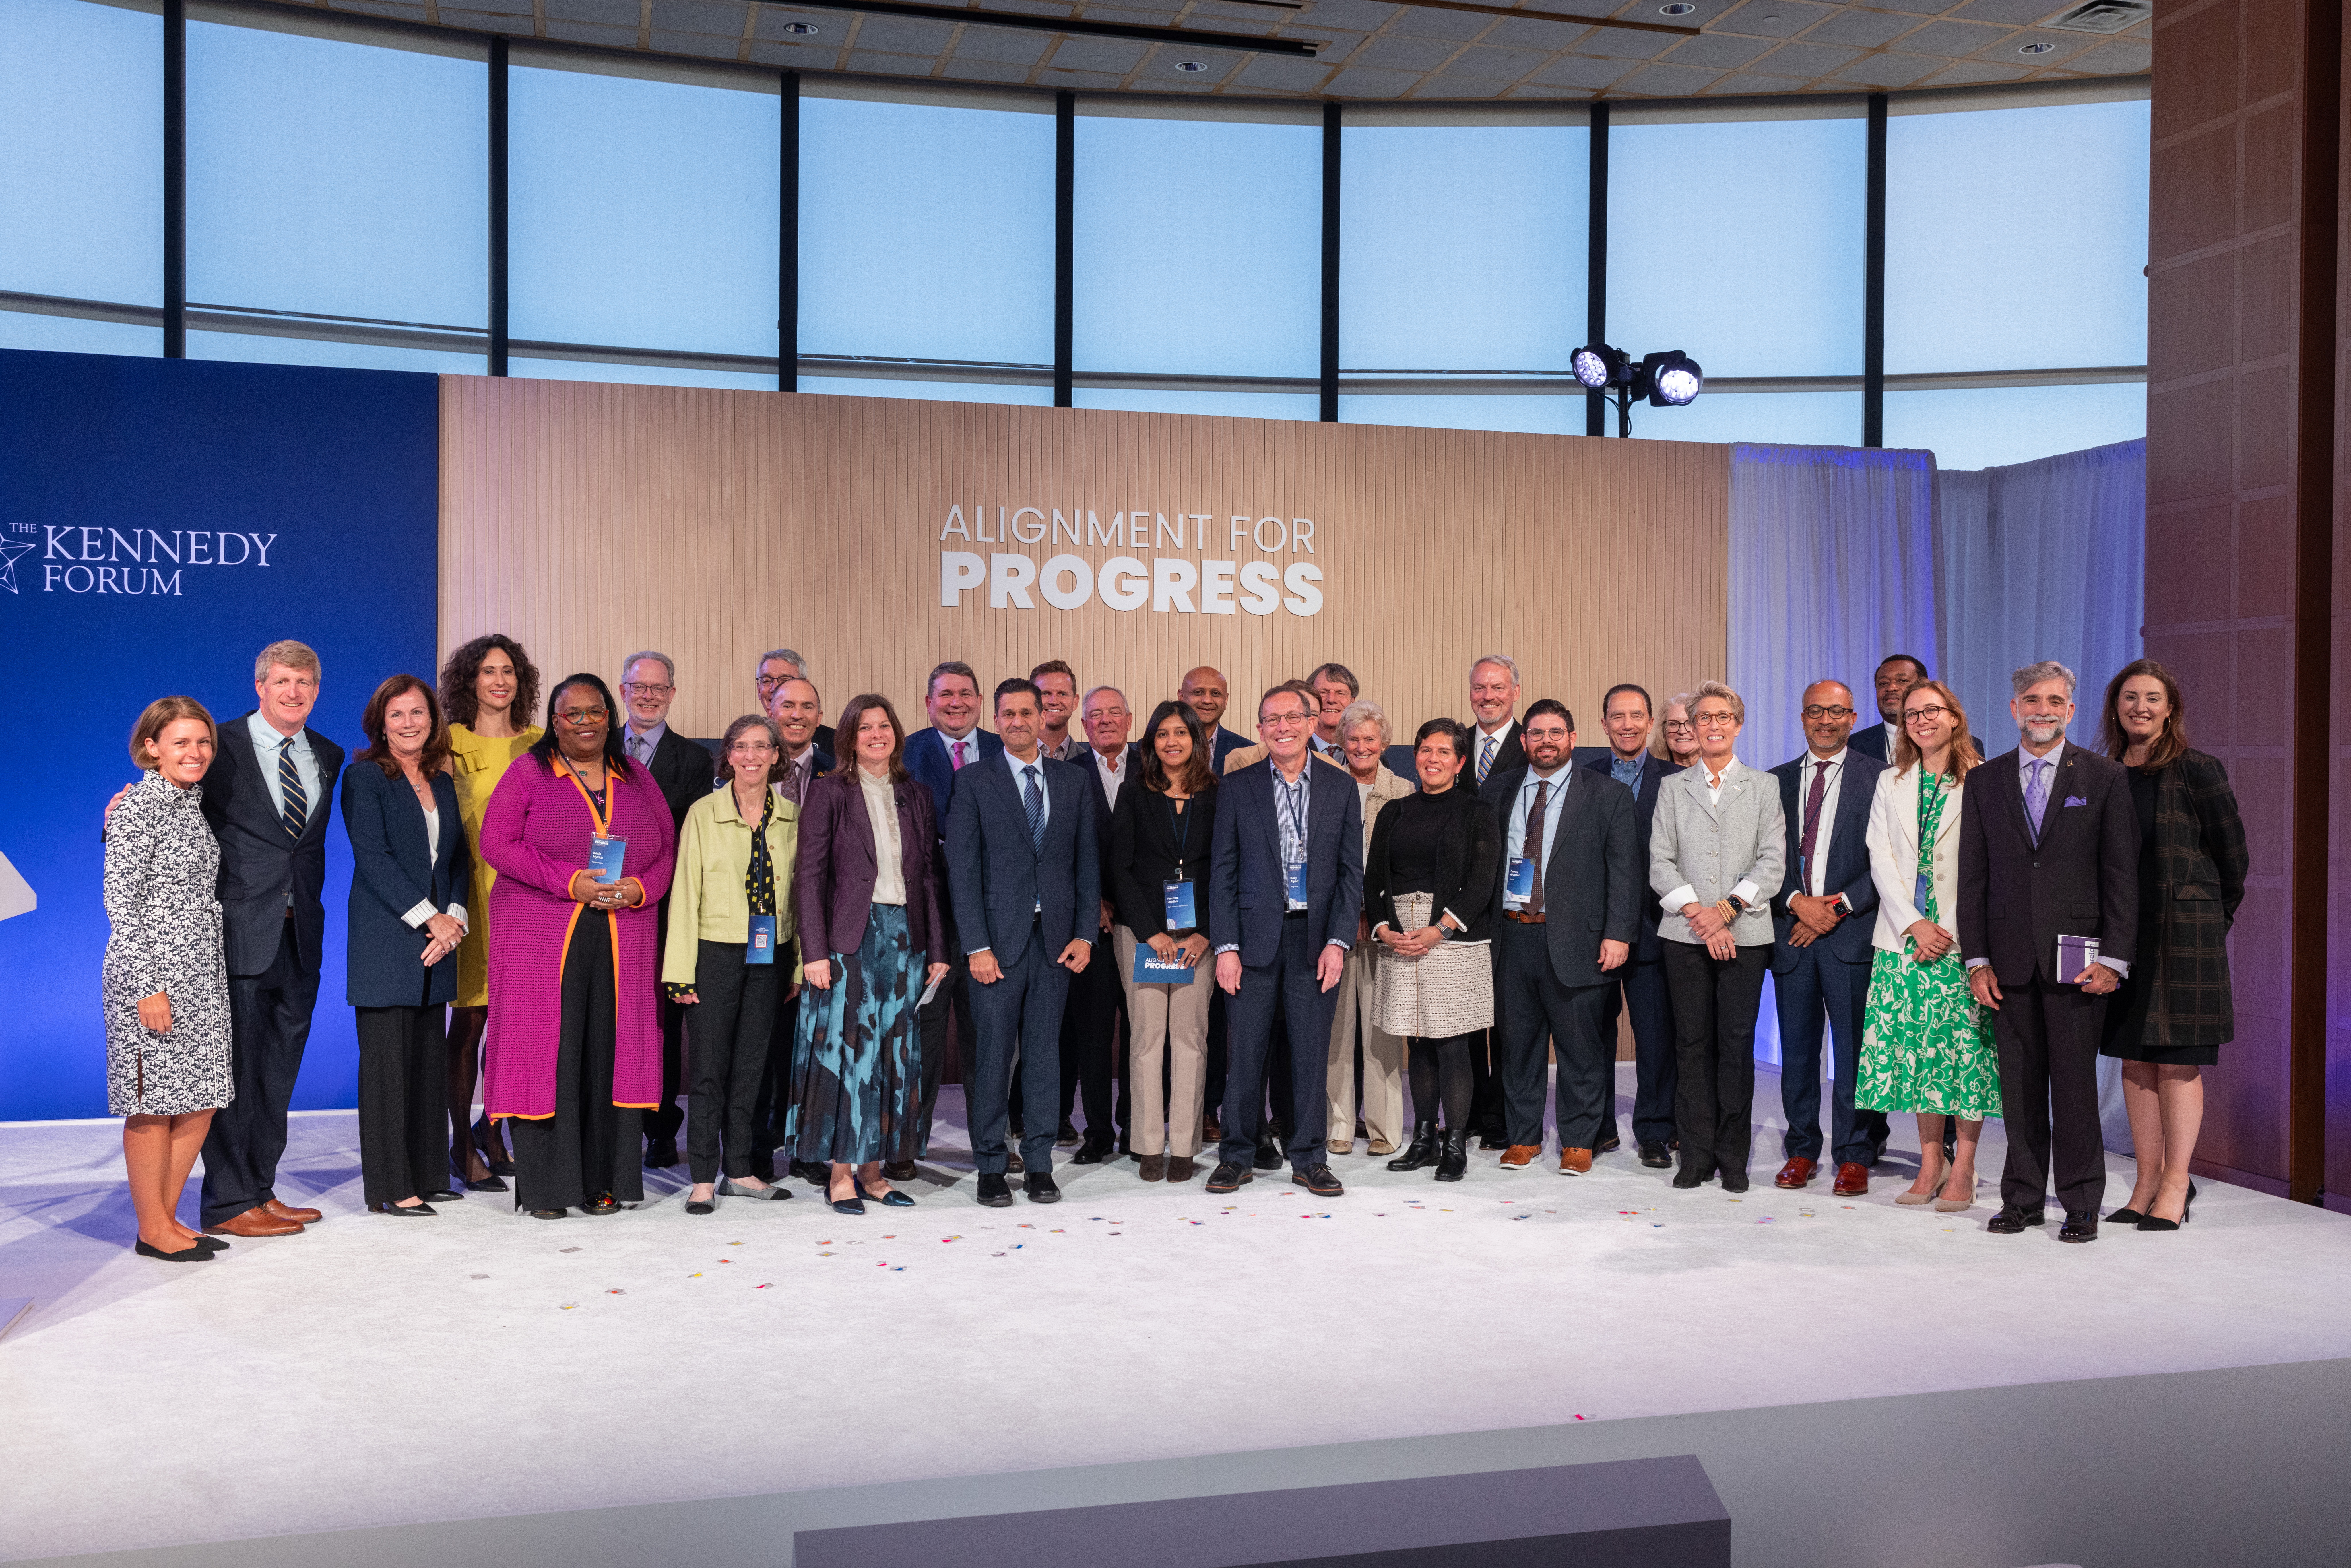 Alignment for Progress conference group photo